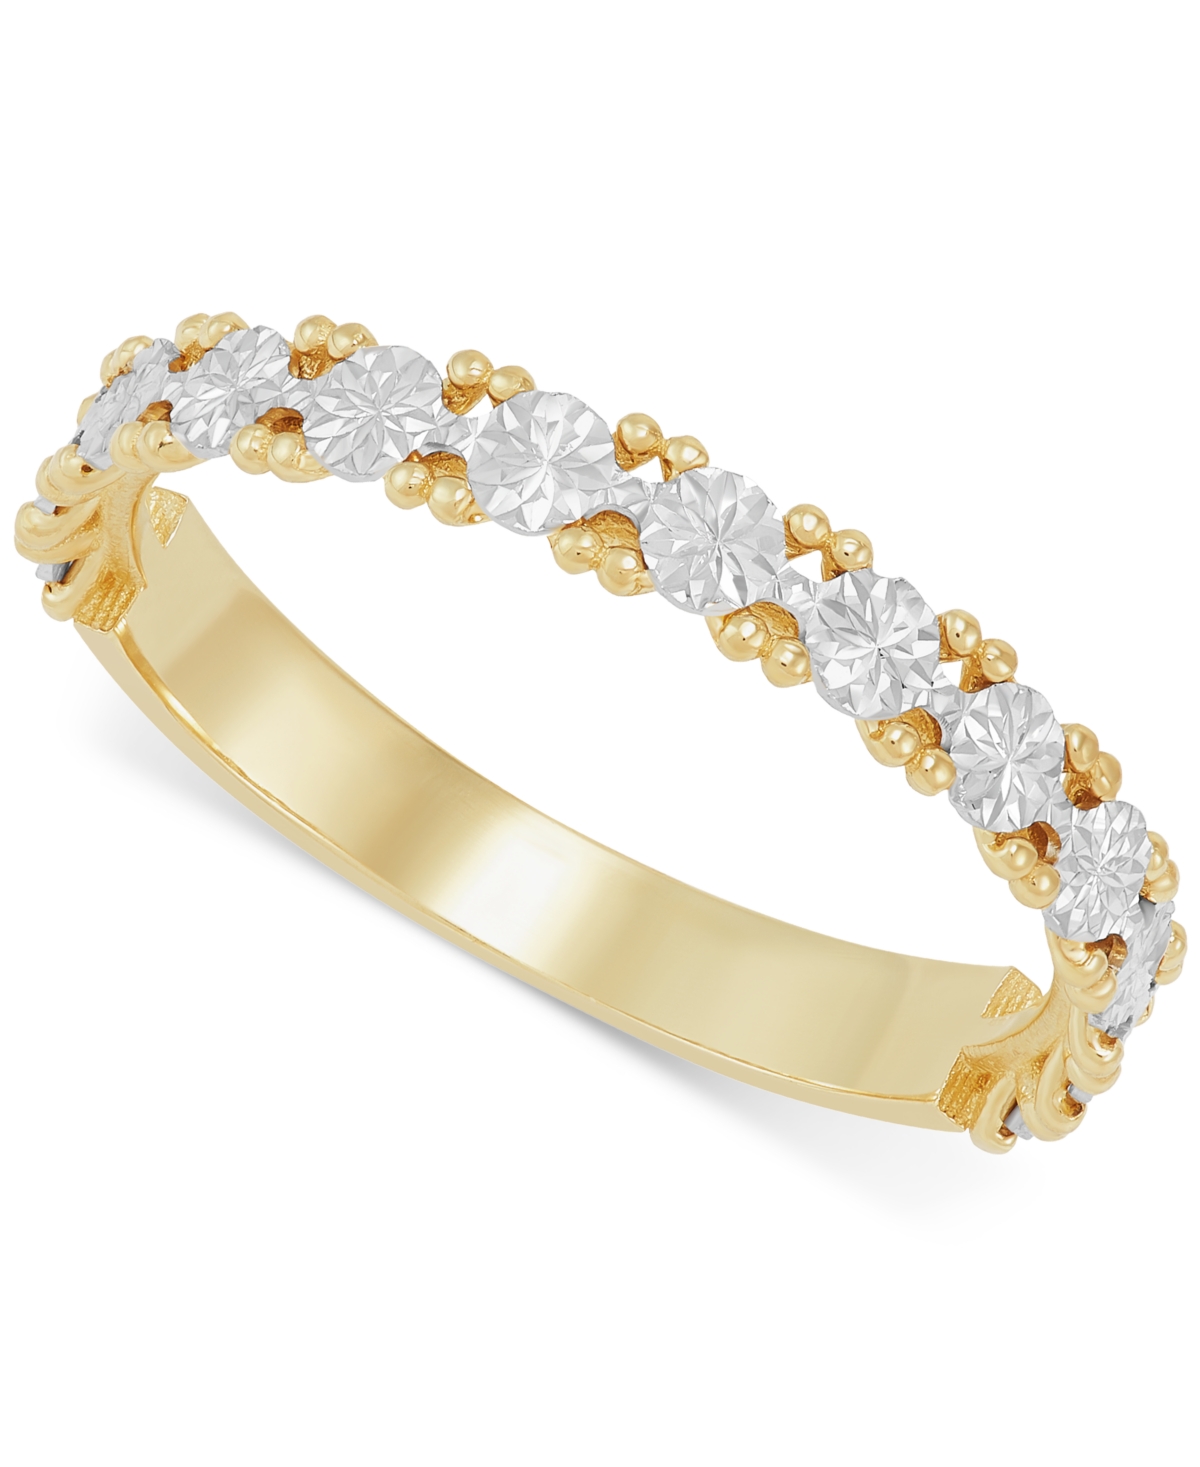 Floral Illusion Stack Ring in 10k Two-Tone Gold, Created for Macy's - Gold